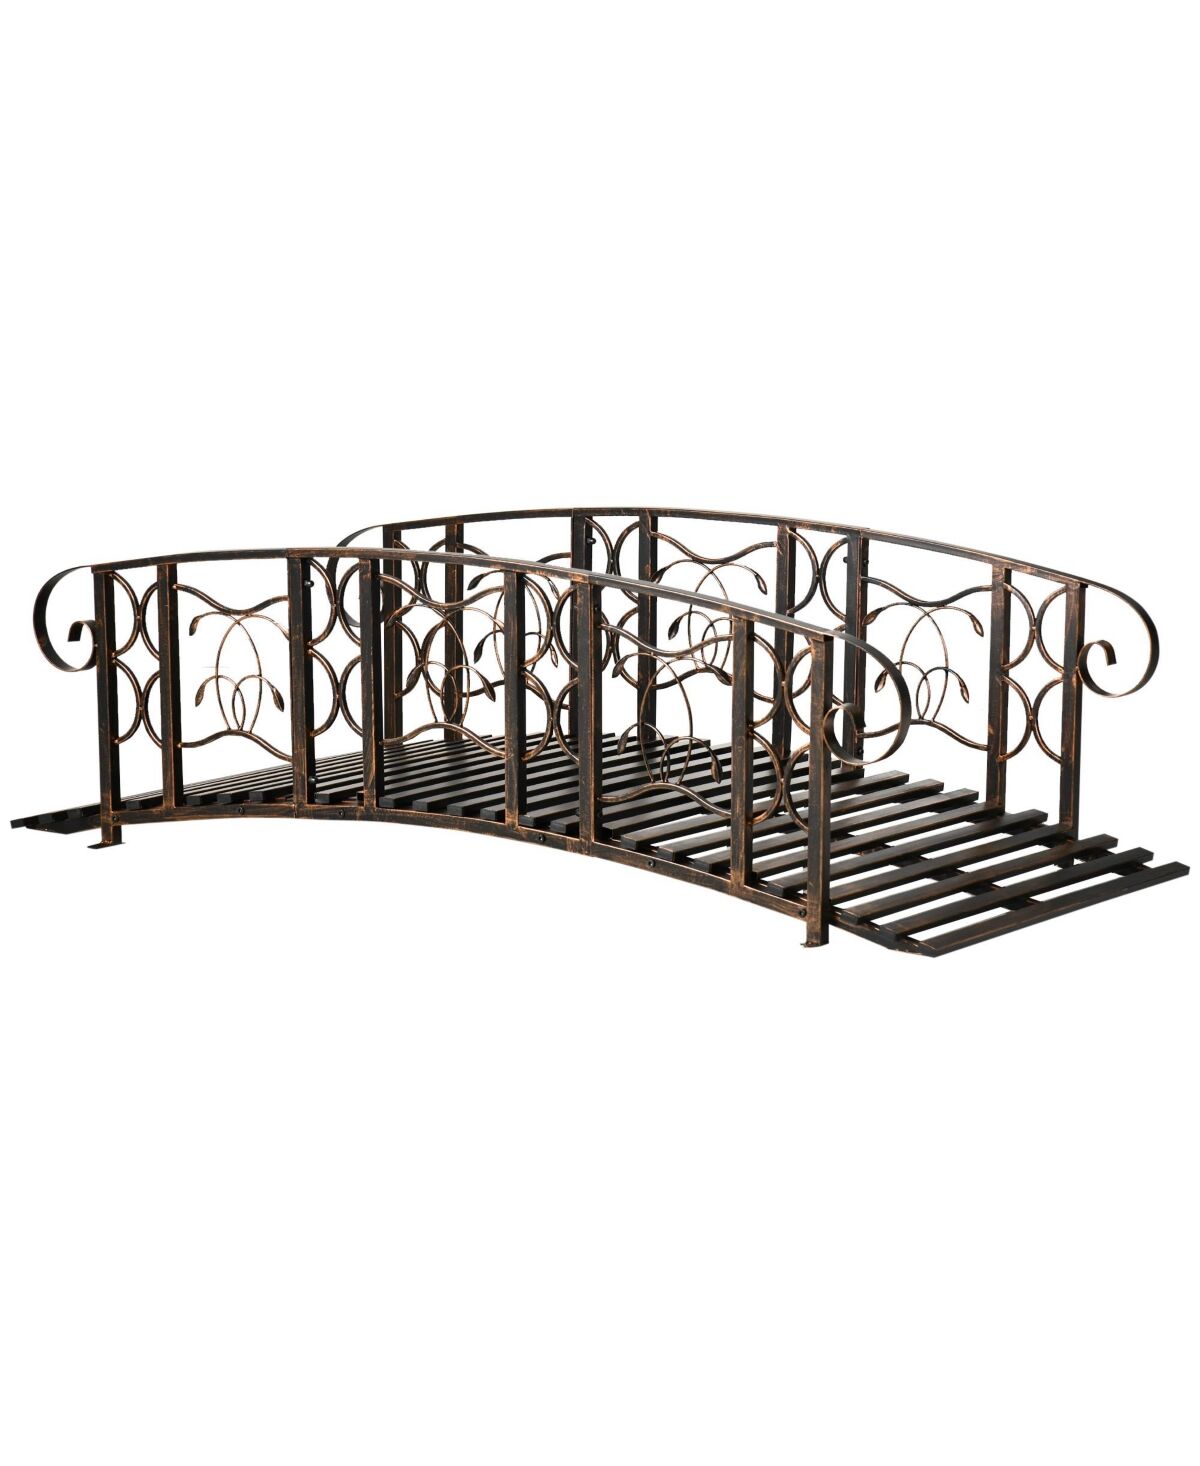 Outsunny 6' Metal Arch Backyard Garden Bridge with 660 lbs. Weight Capacity, Safety Siderails, Vine Motifs, & Easy Assembly for Backyard Creek, Stream